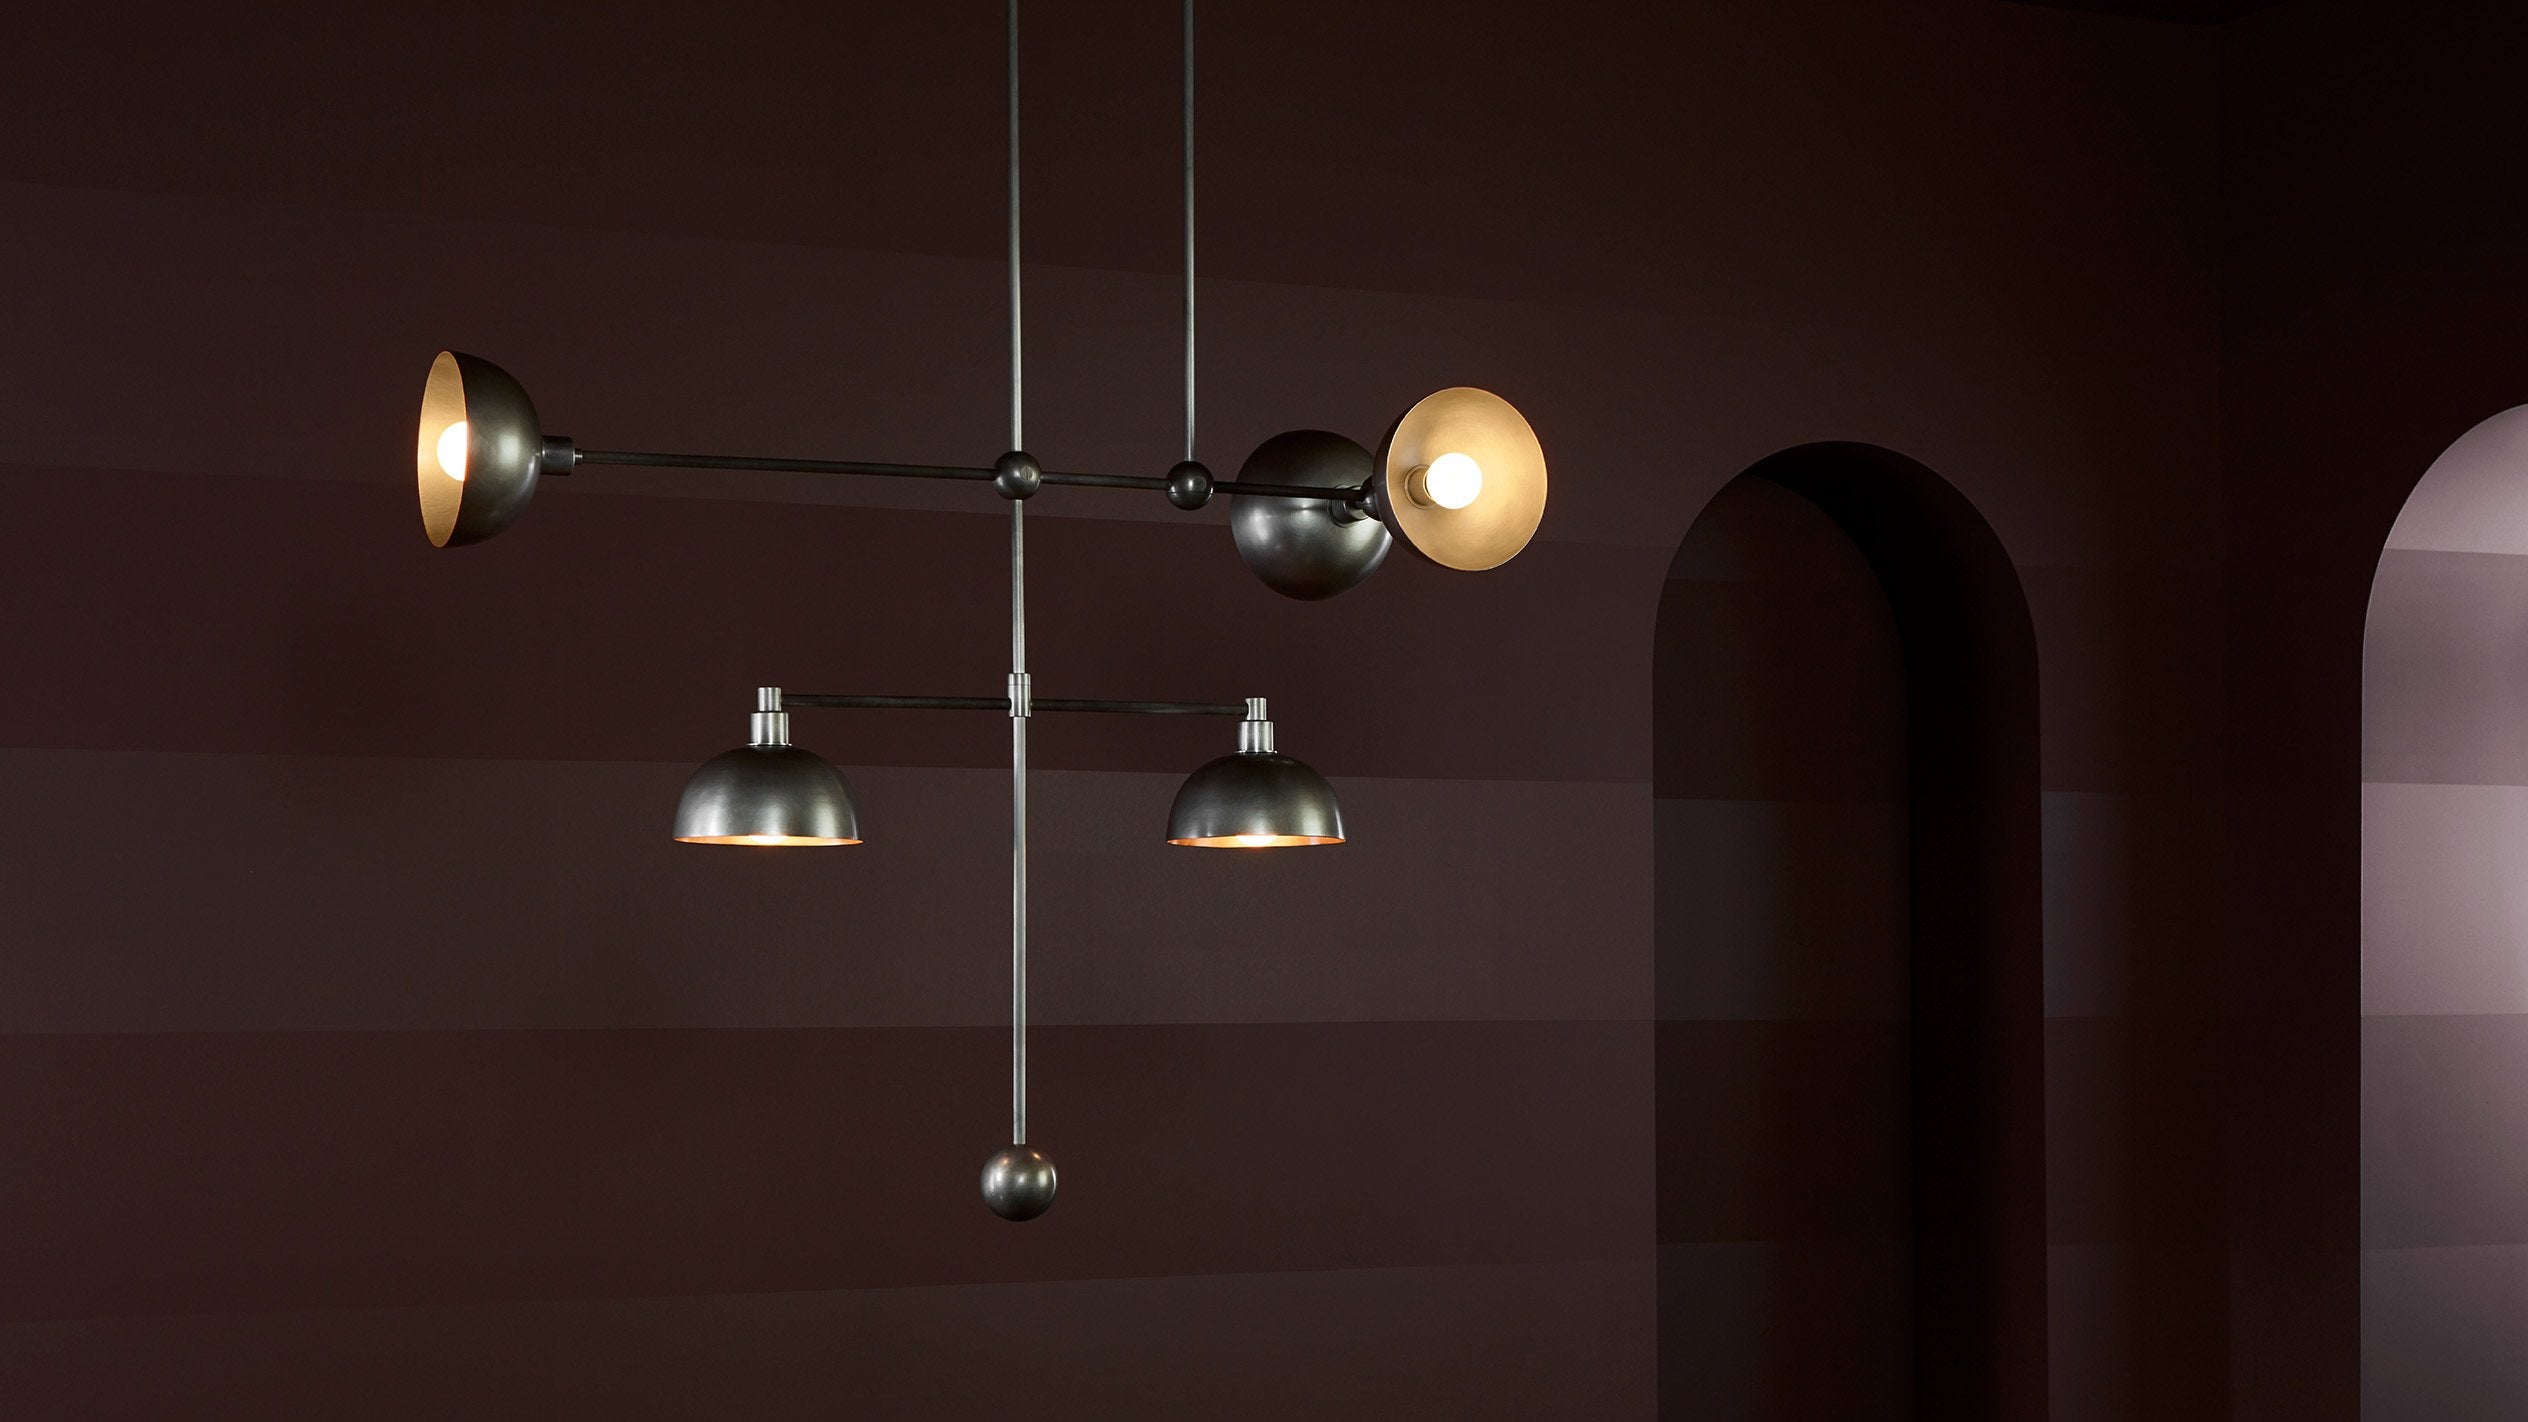 An illuminated TRAPEZE : 5 MOBILE ceiling pendant in Tarnished Silver finish. 